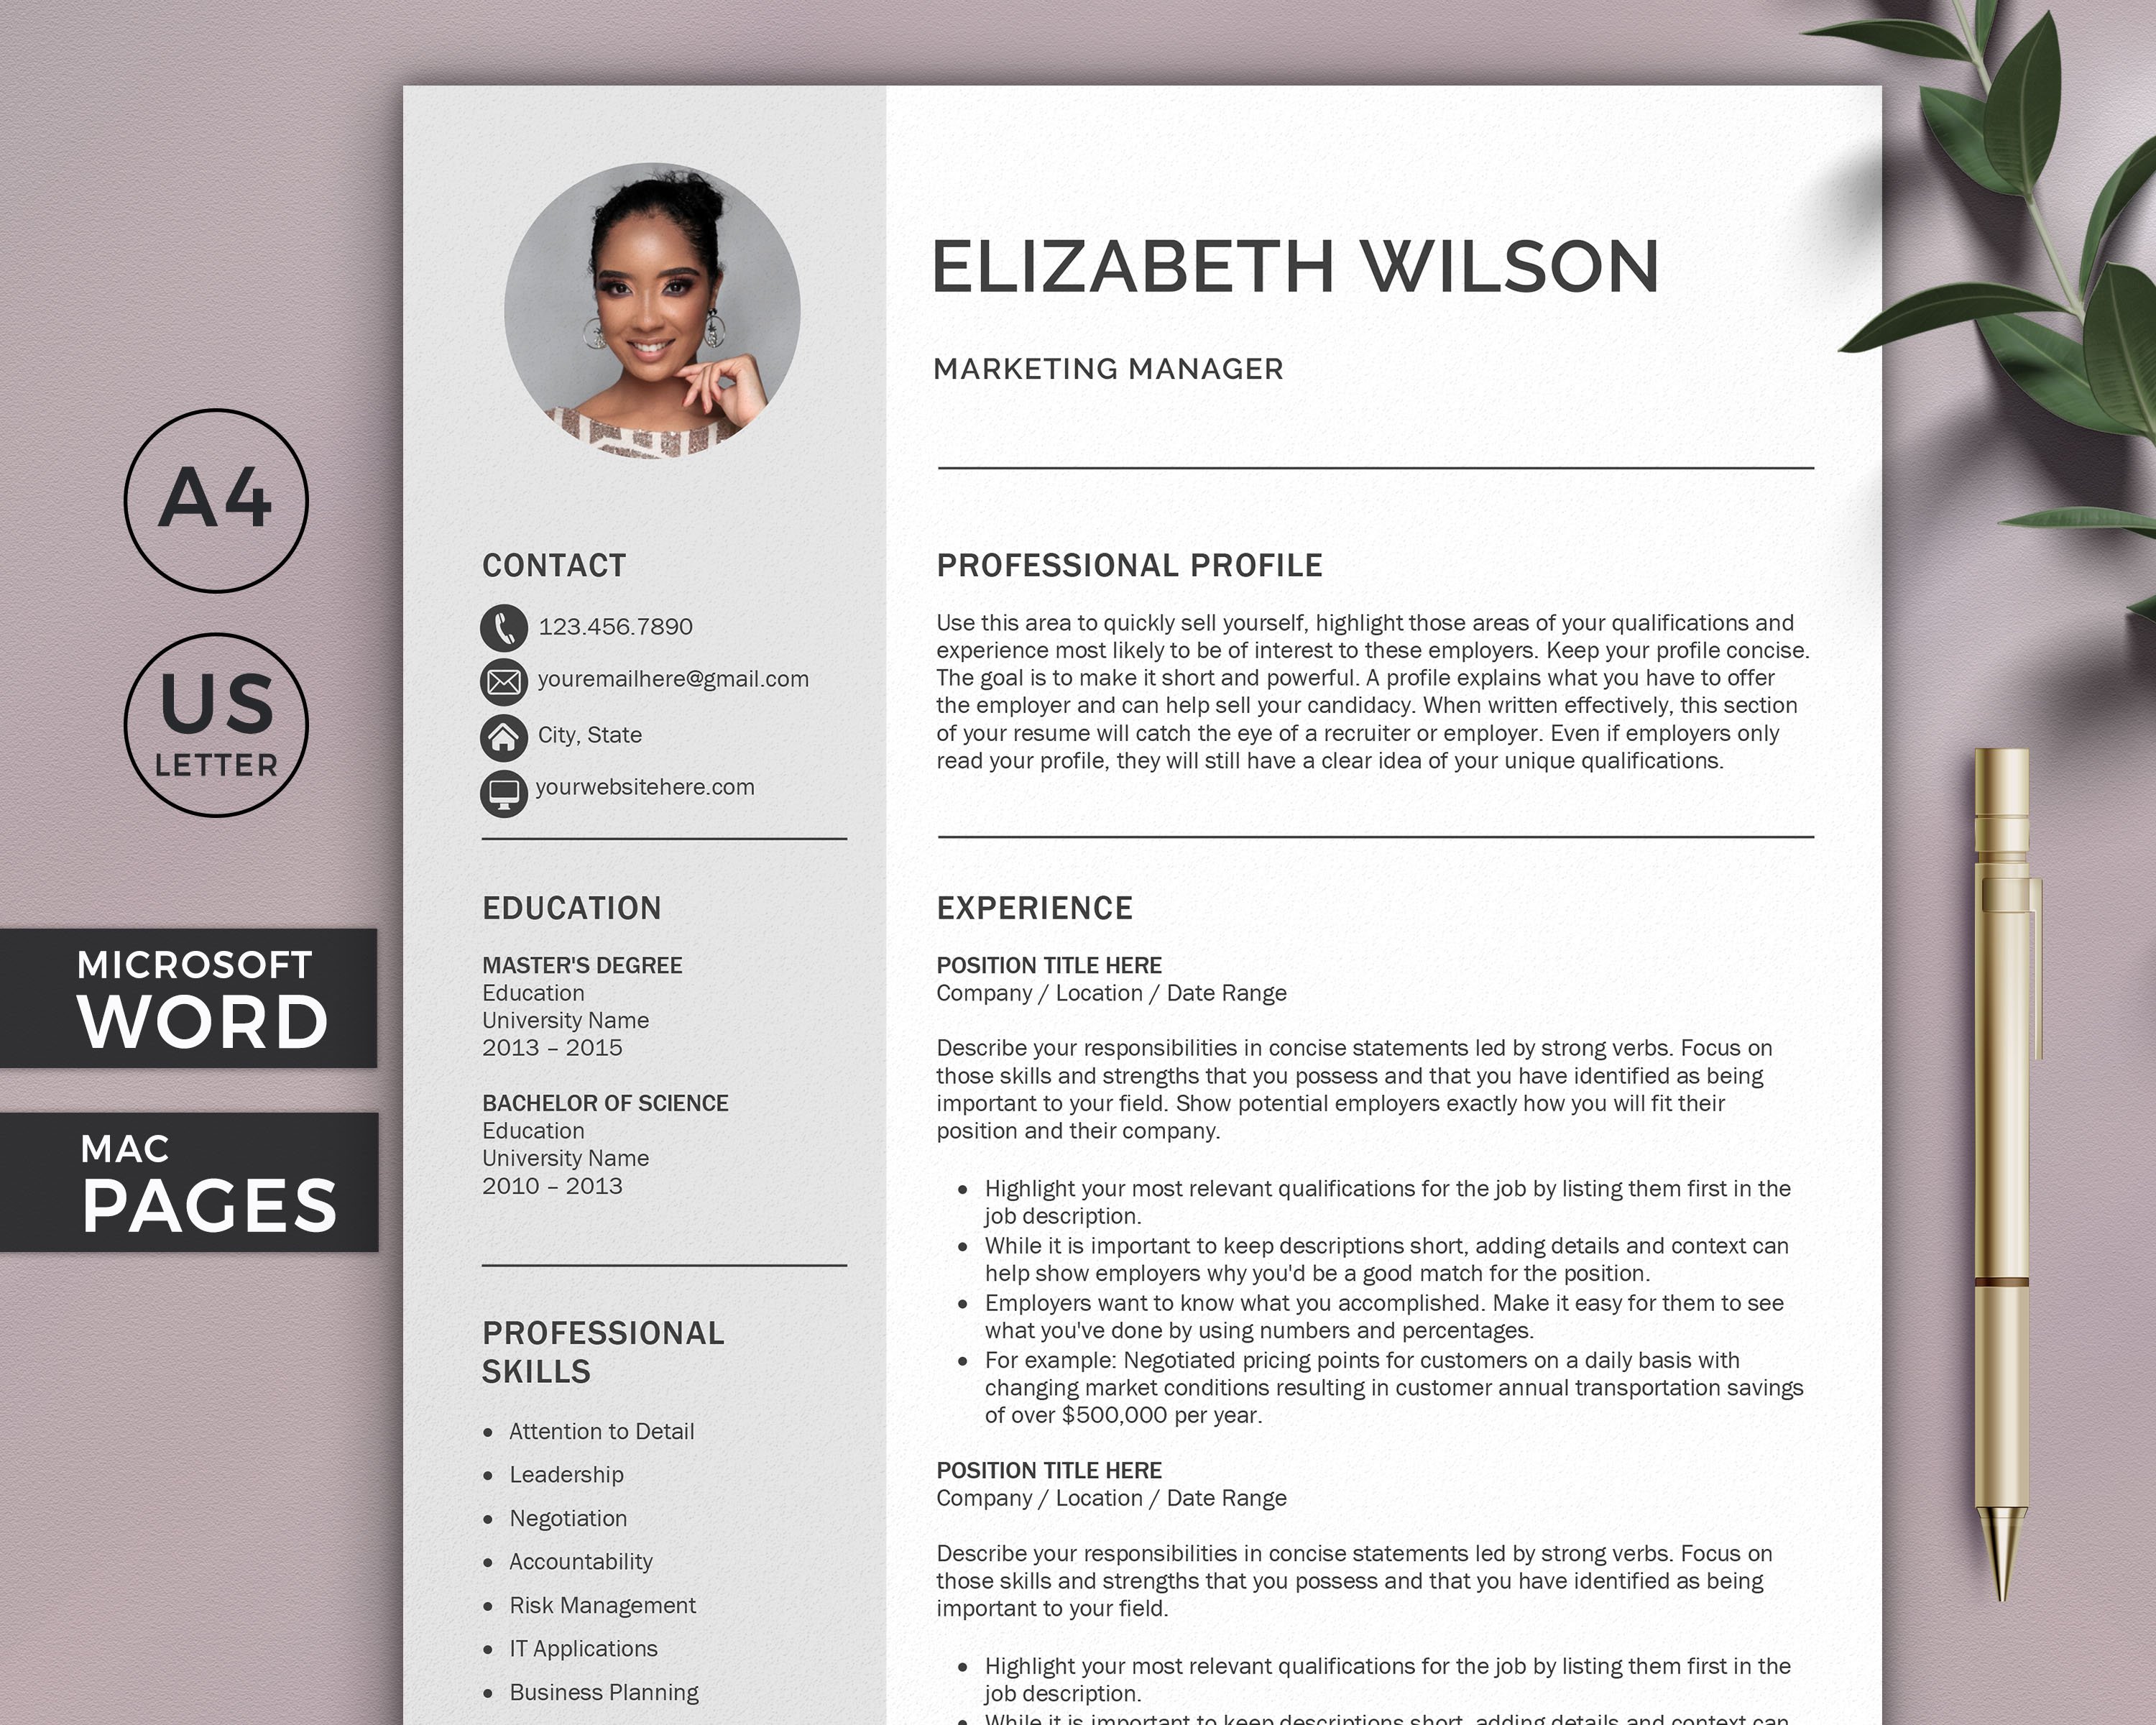 Resume - CV Template with Photo cover image.